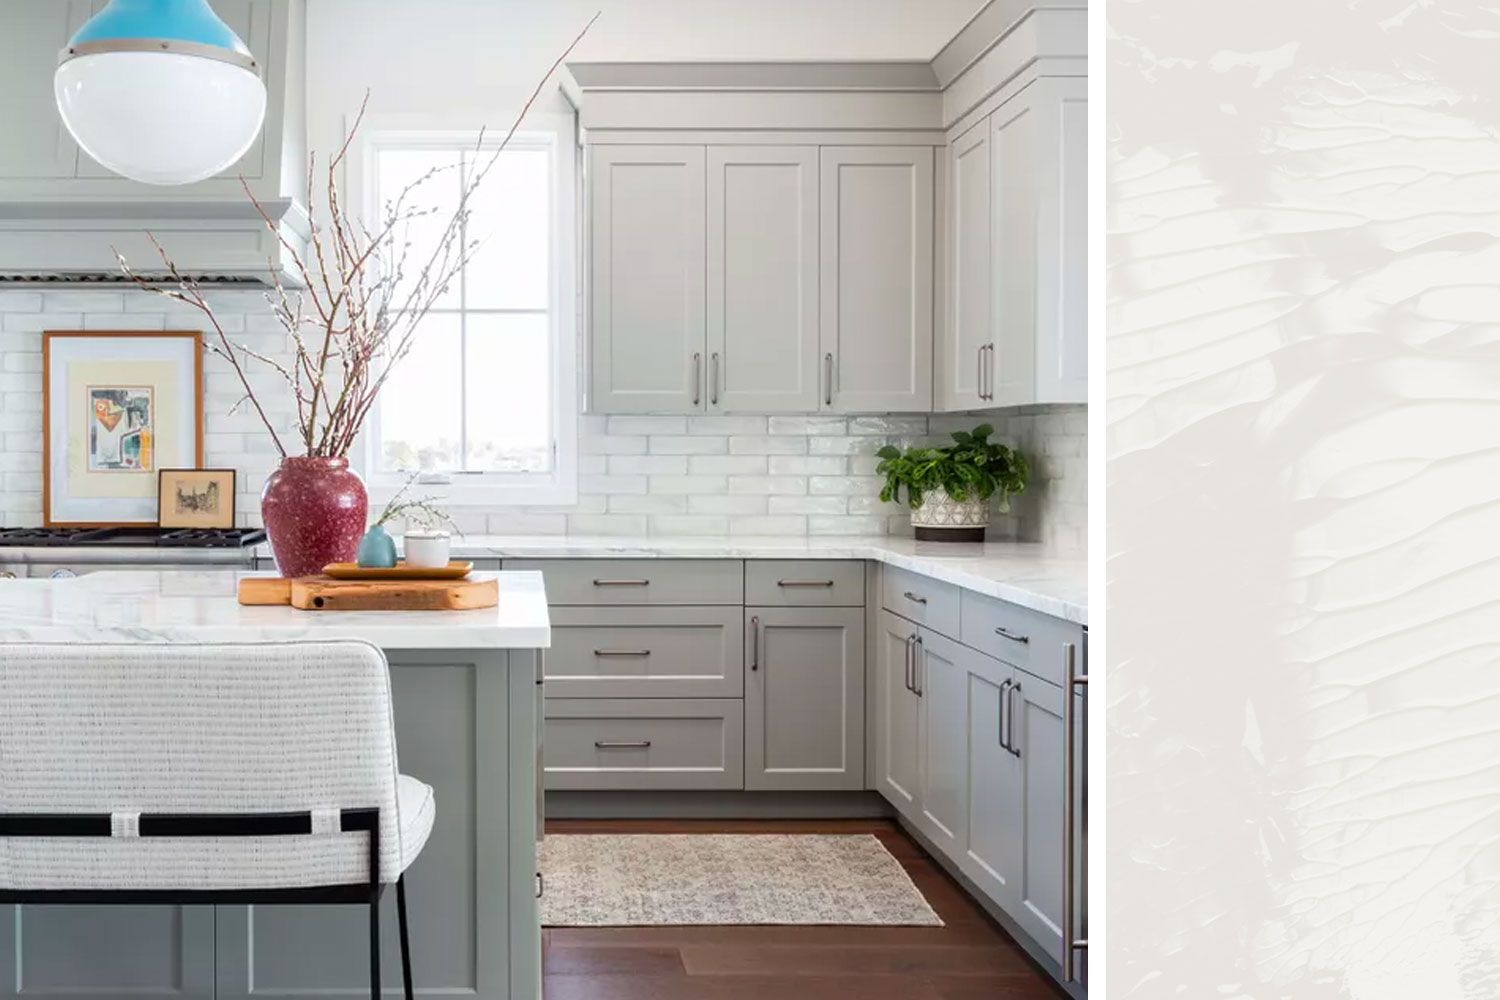 Benjamin Moore Calm kitchen inspiration and paint swatch